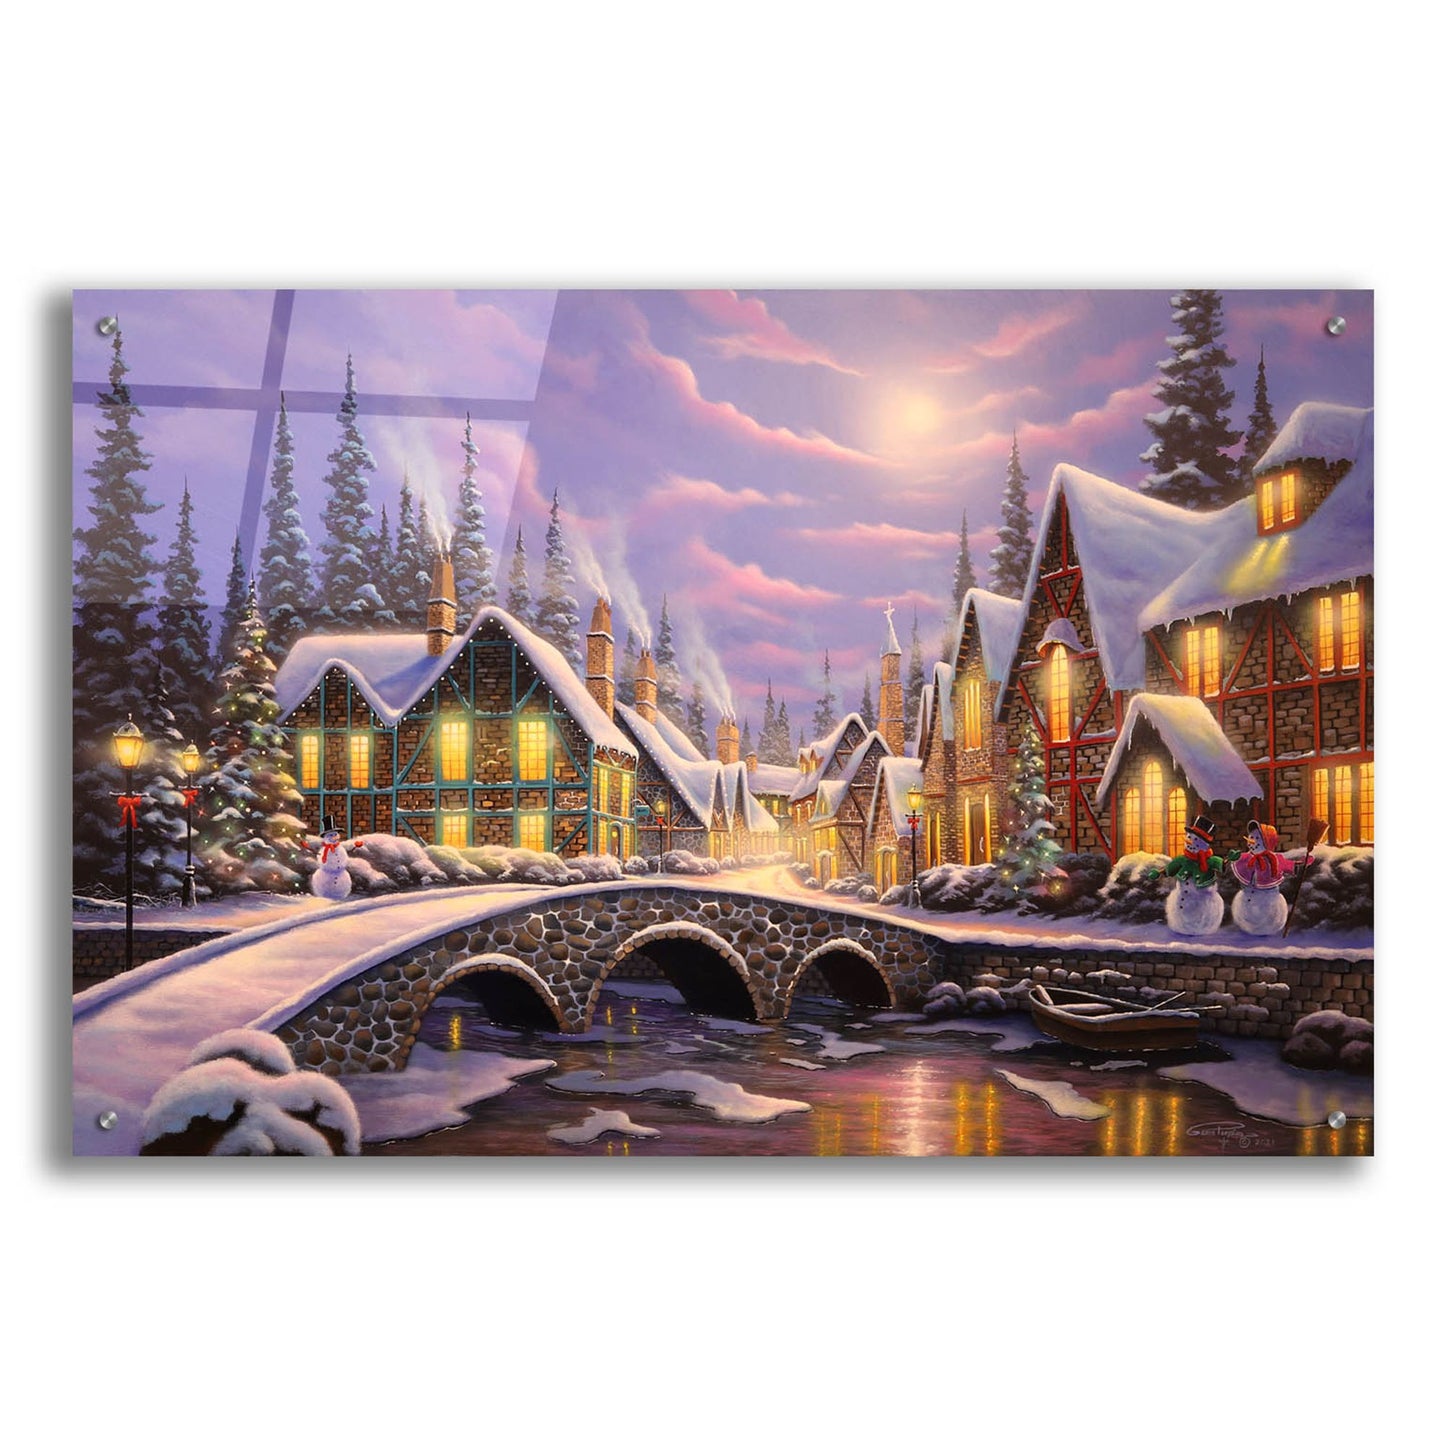 Epic Art 'A Snowy Christmas' by Geno Peoples, Acrylic Glass Wall Art,36x24